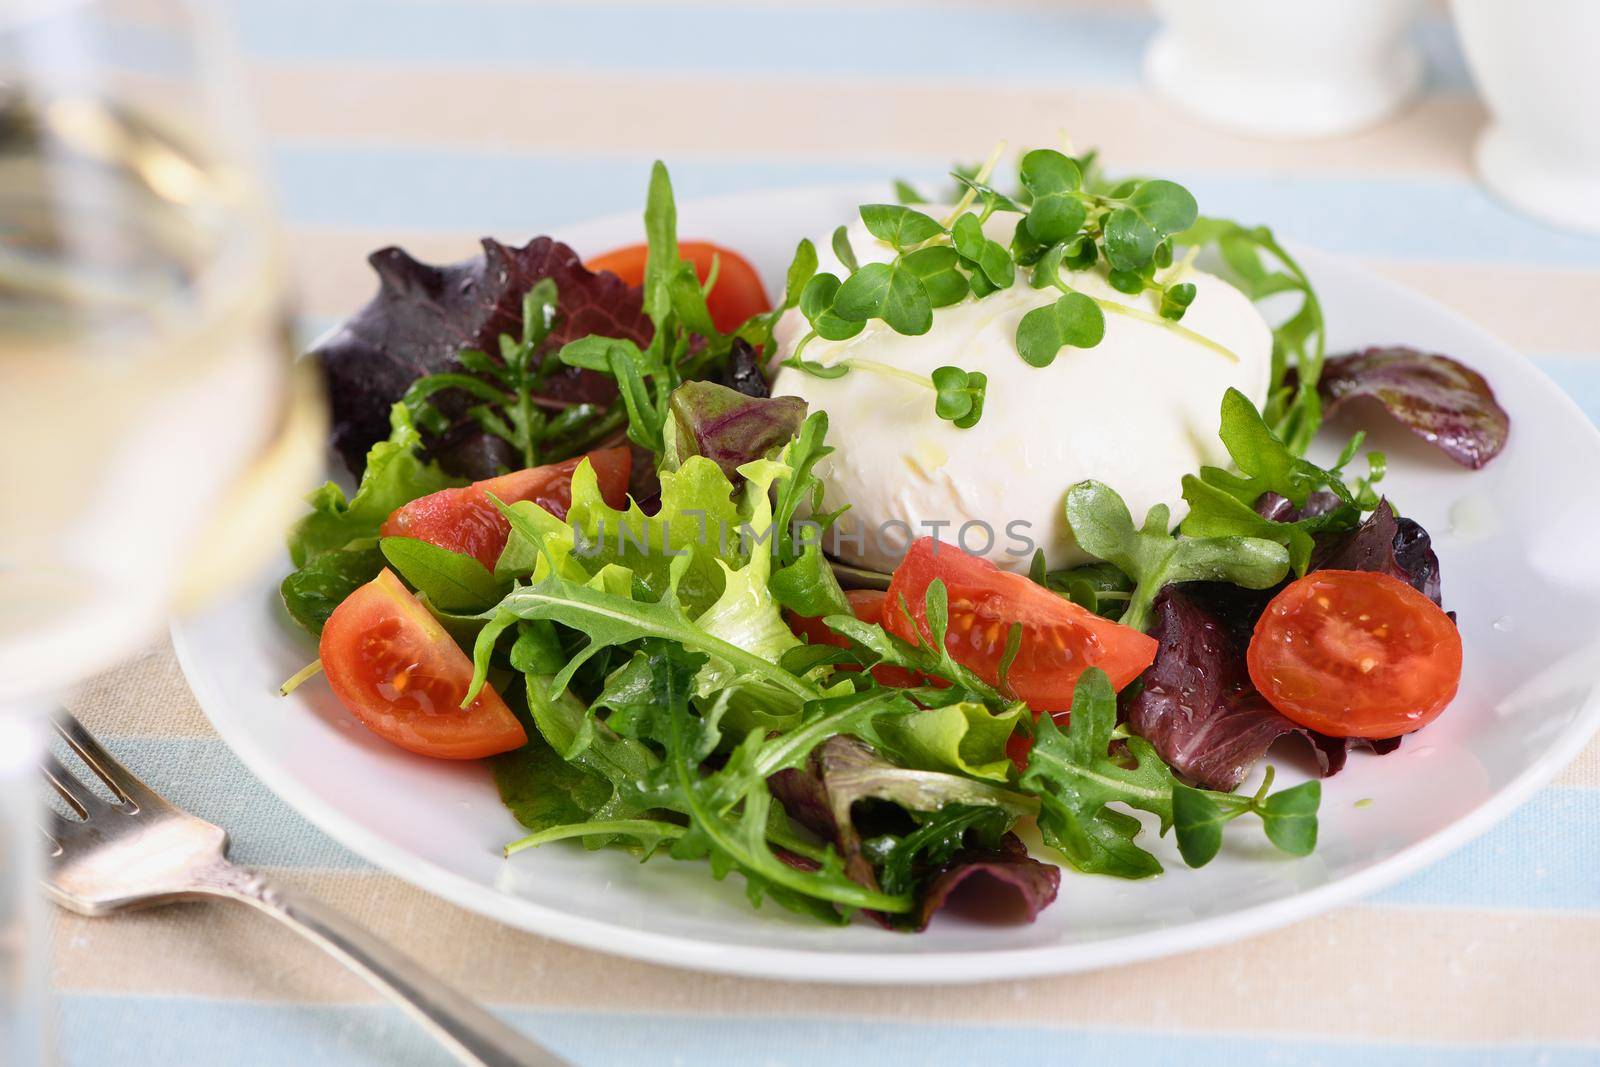 Mozzarella cheese with vegetables by Apolonia